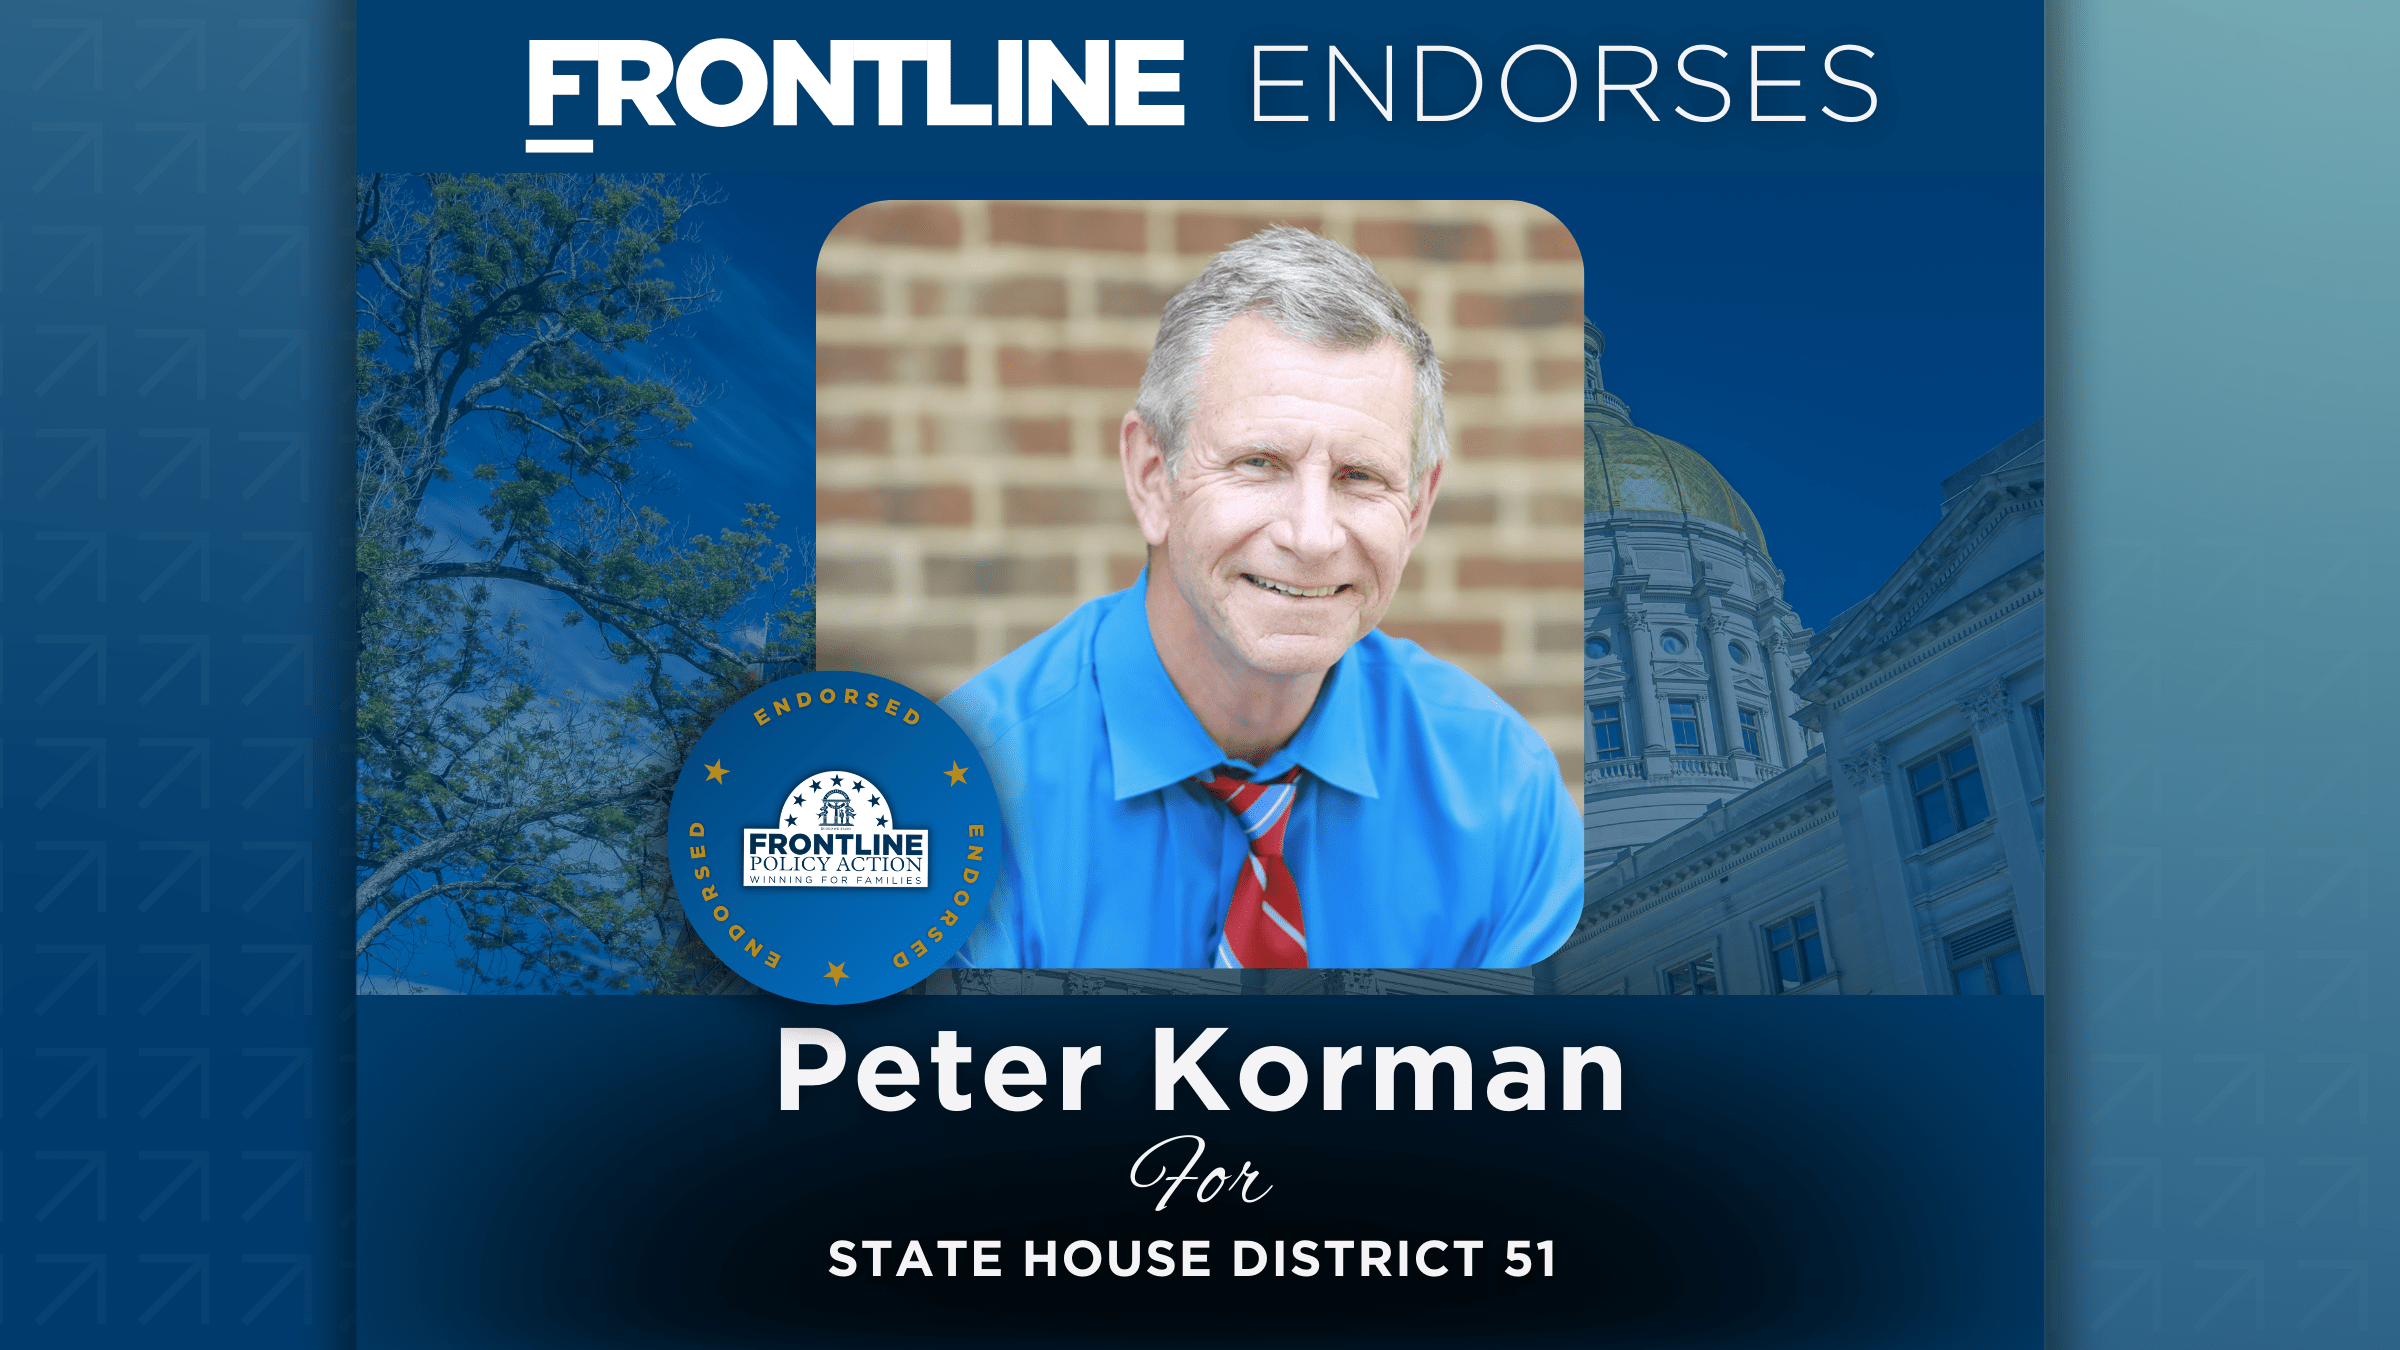 BREAKING: Frontline Endorses Peter Korman for State House District 51